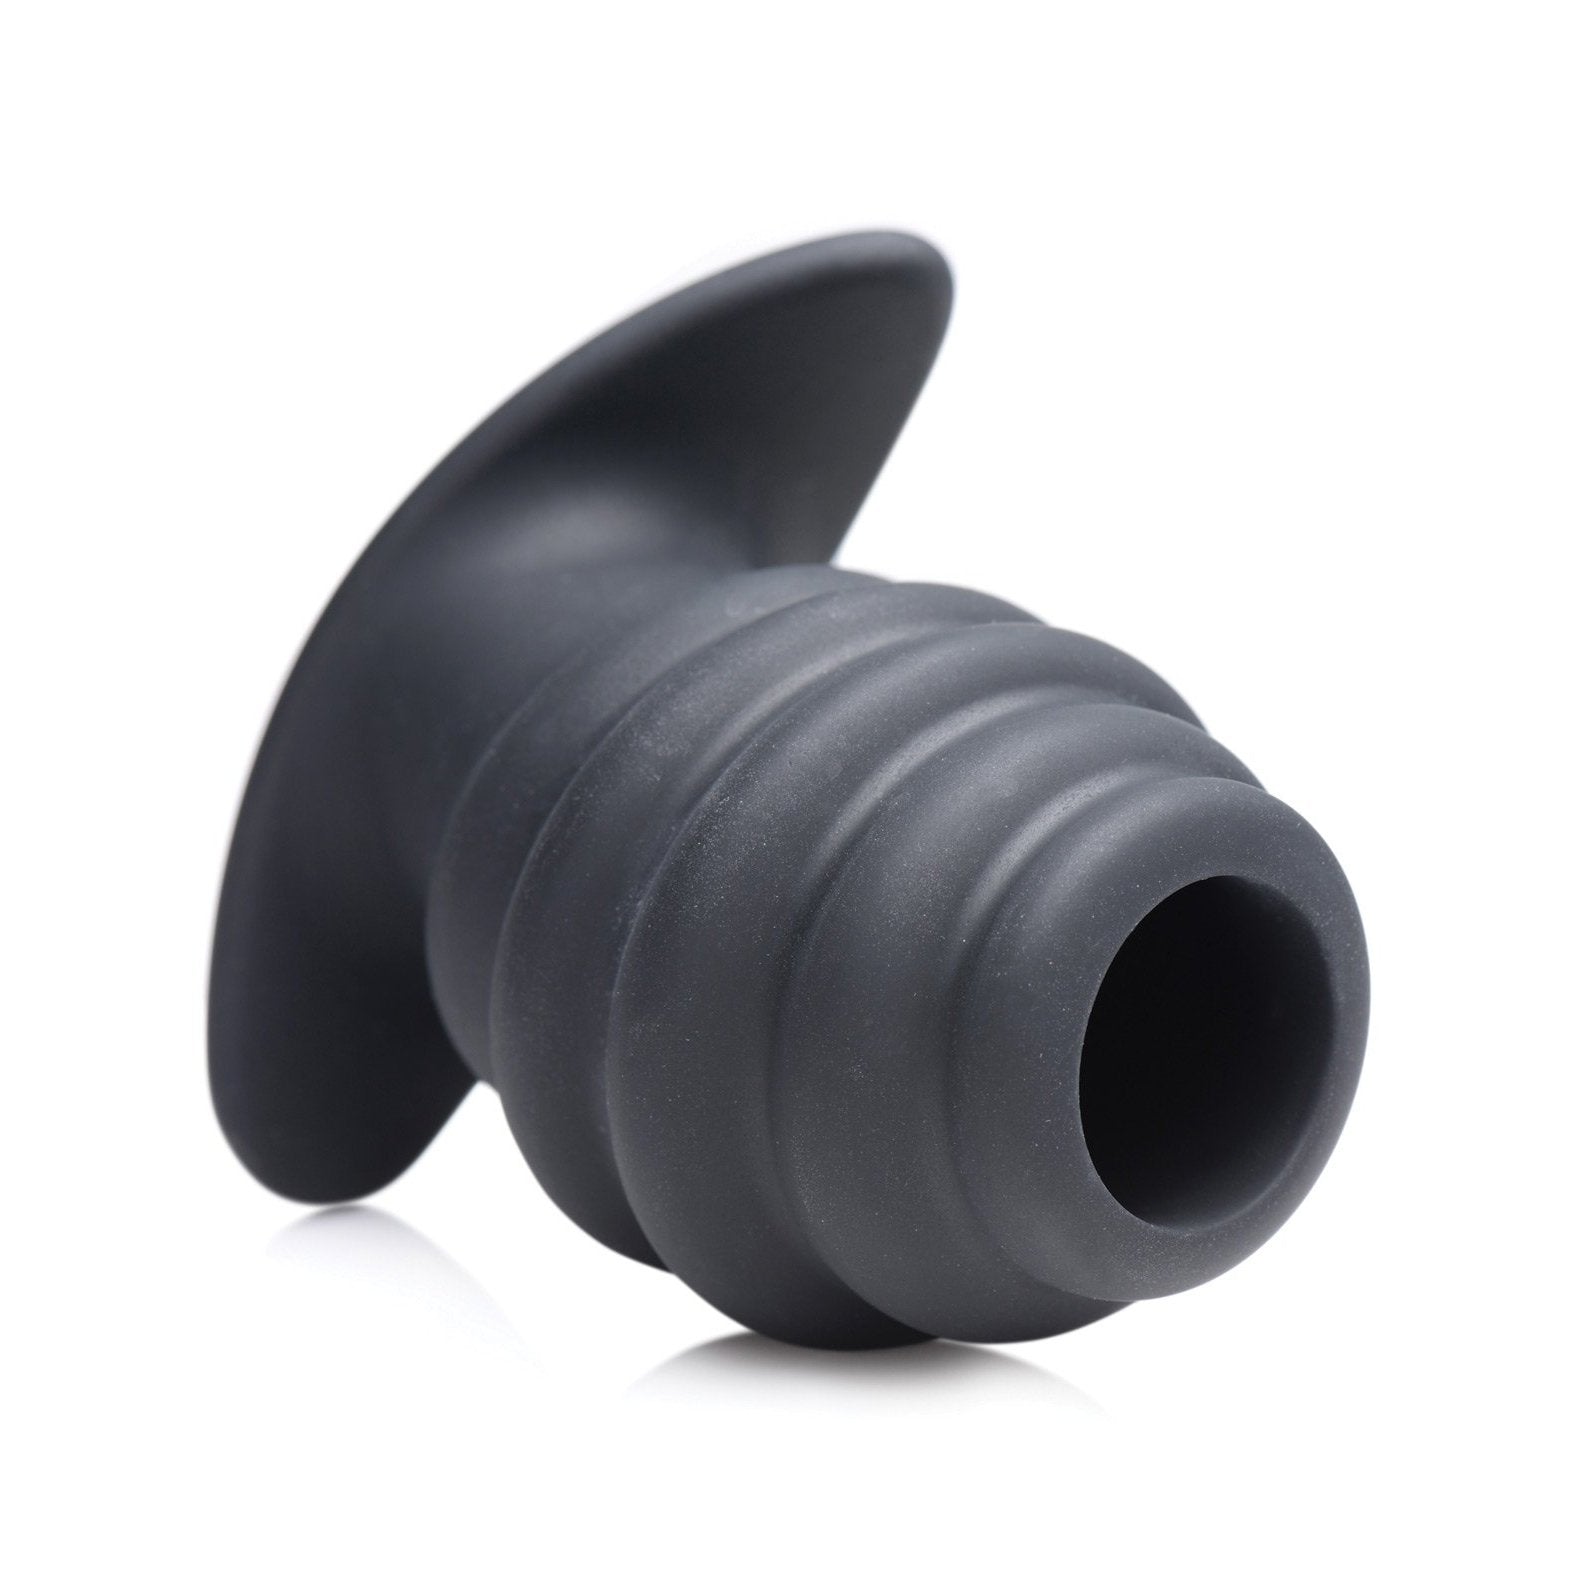 Master Series Hive Ass Tunnel 3.4" Silicone Ribbed Hollow Anal Plug